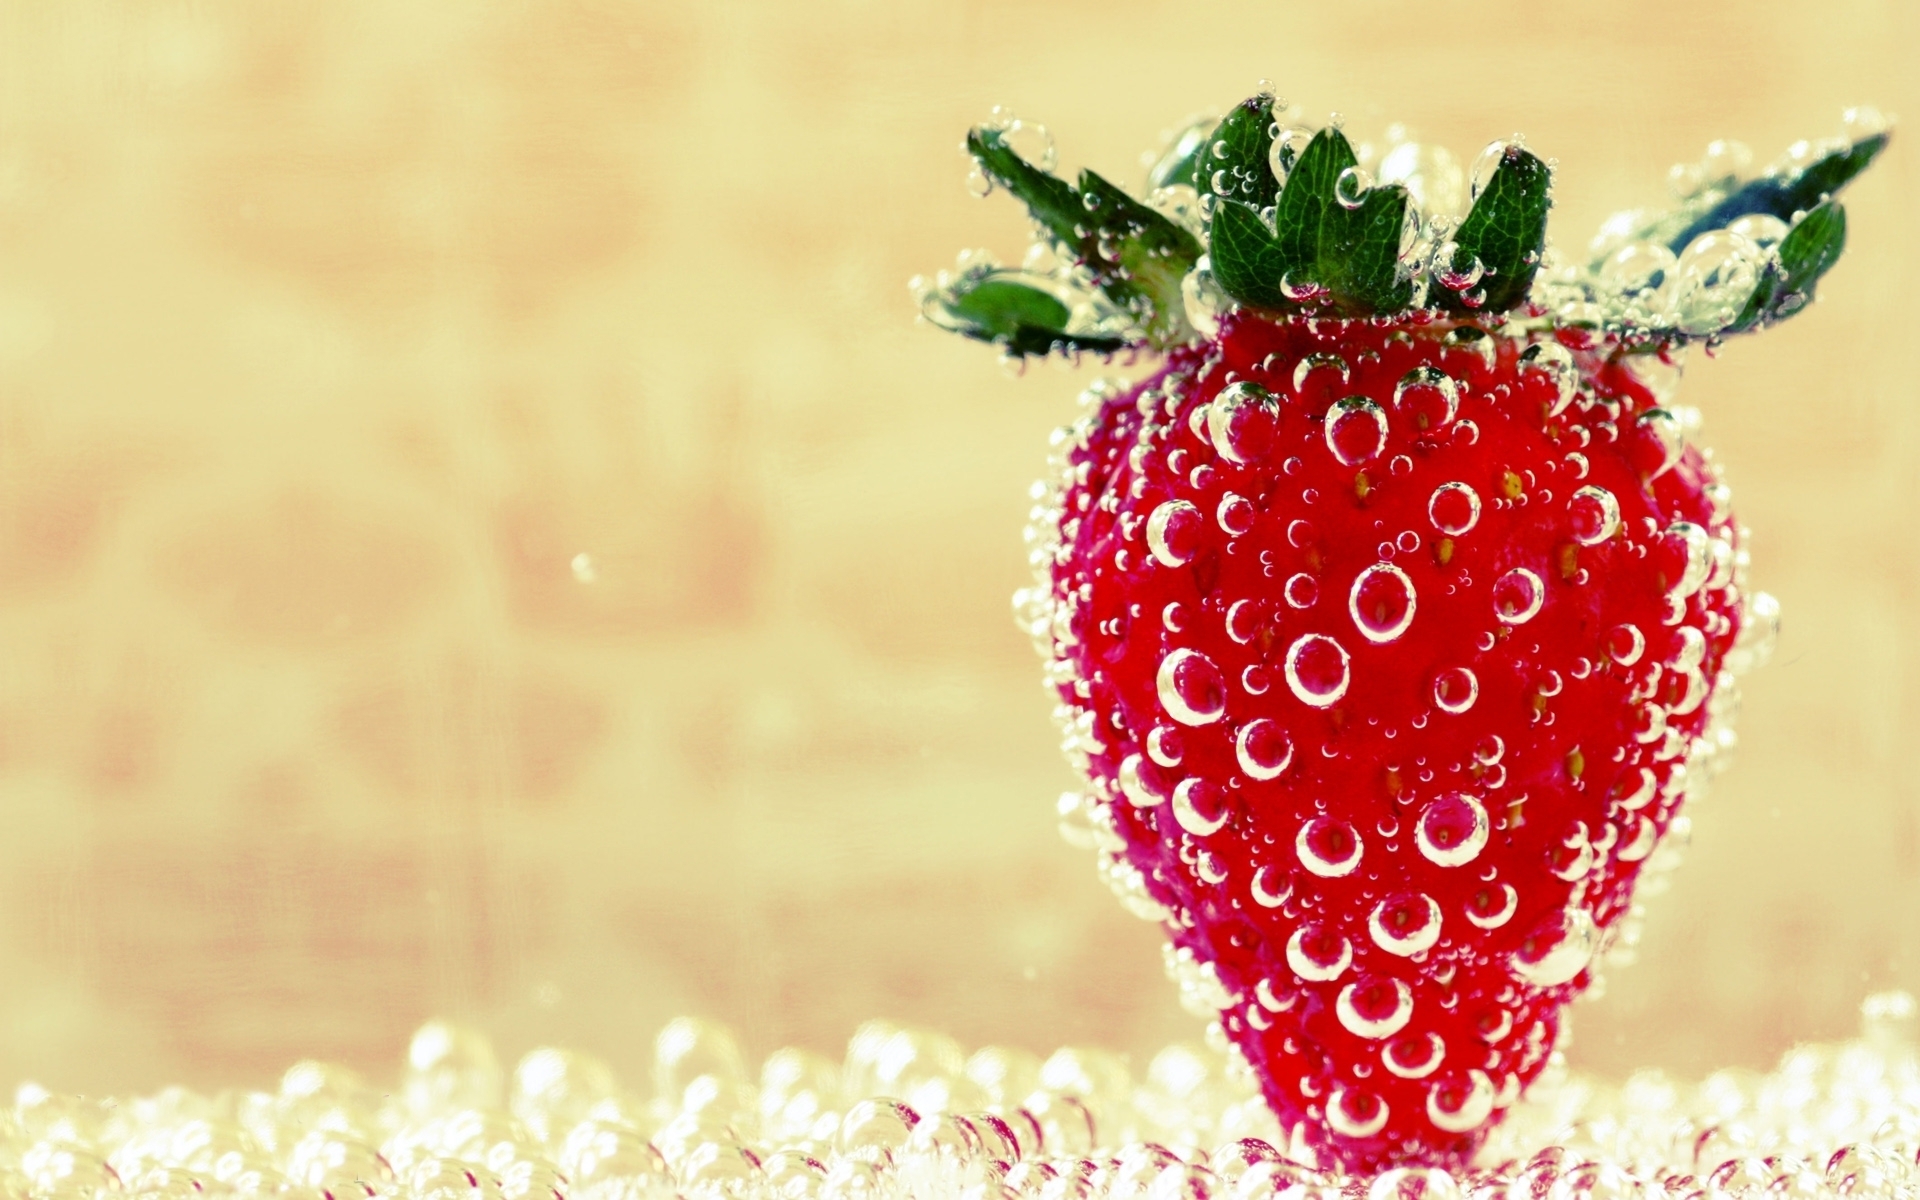 Sohel Name Wallpaper - Cute Strawberry Wallpapers For Mobile , HD Wallpaper & Backgrounds